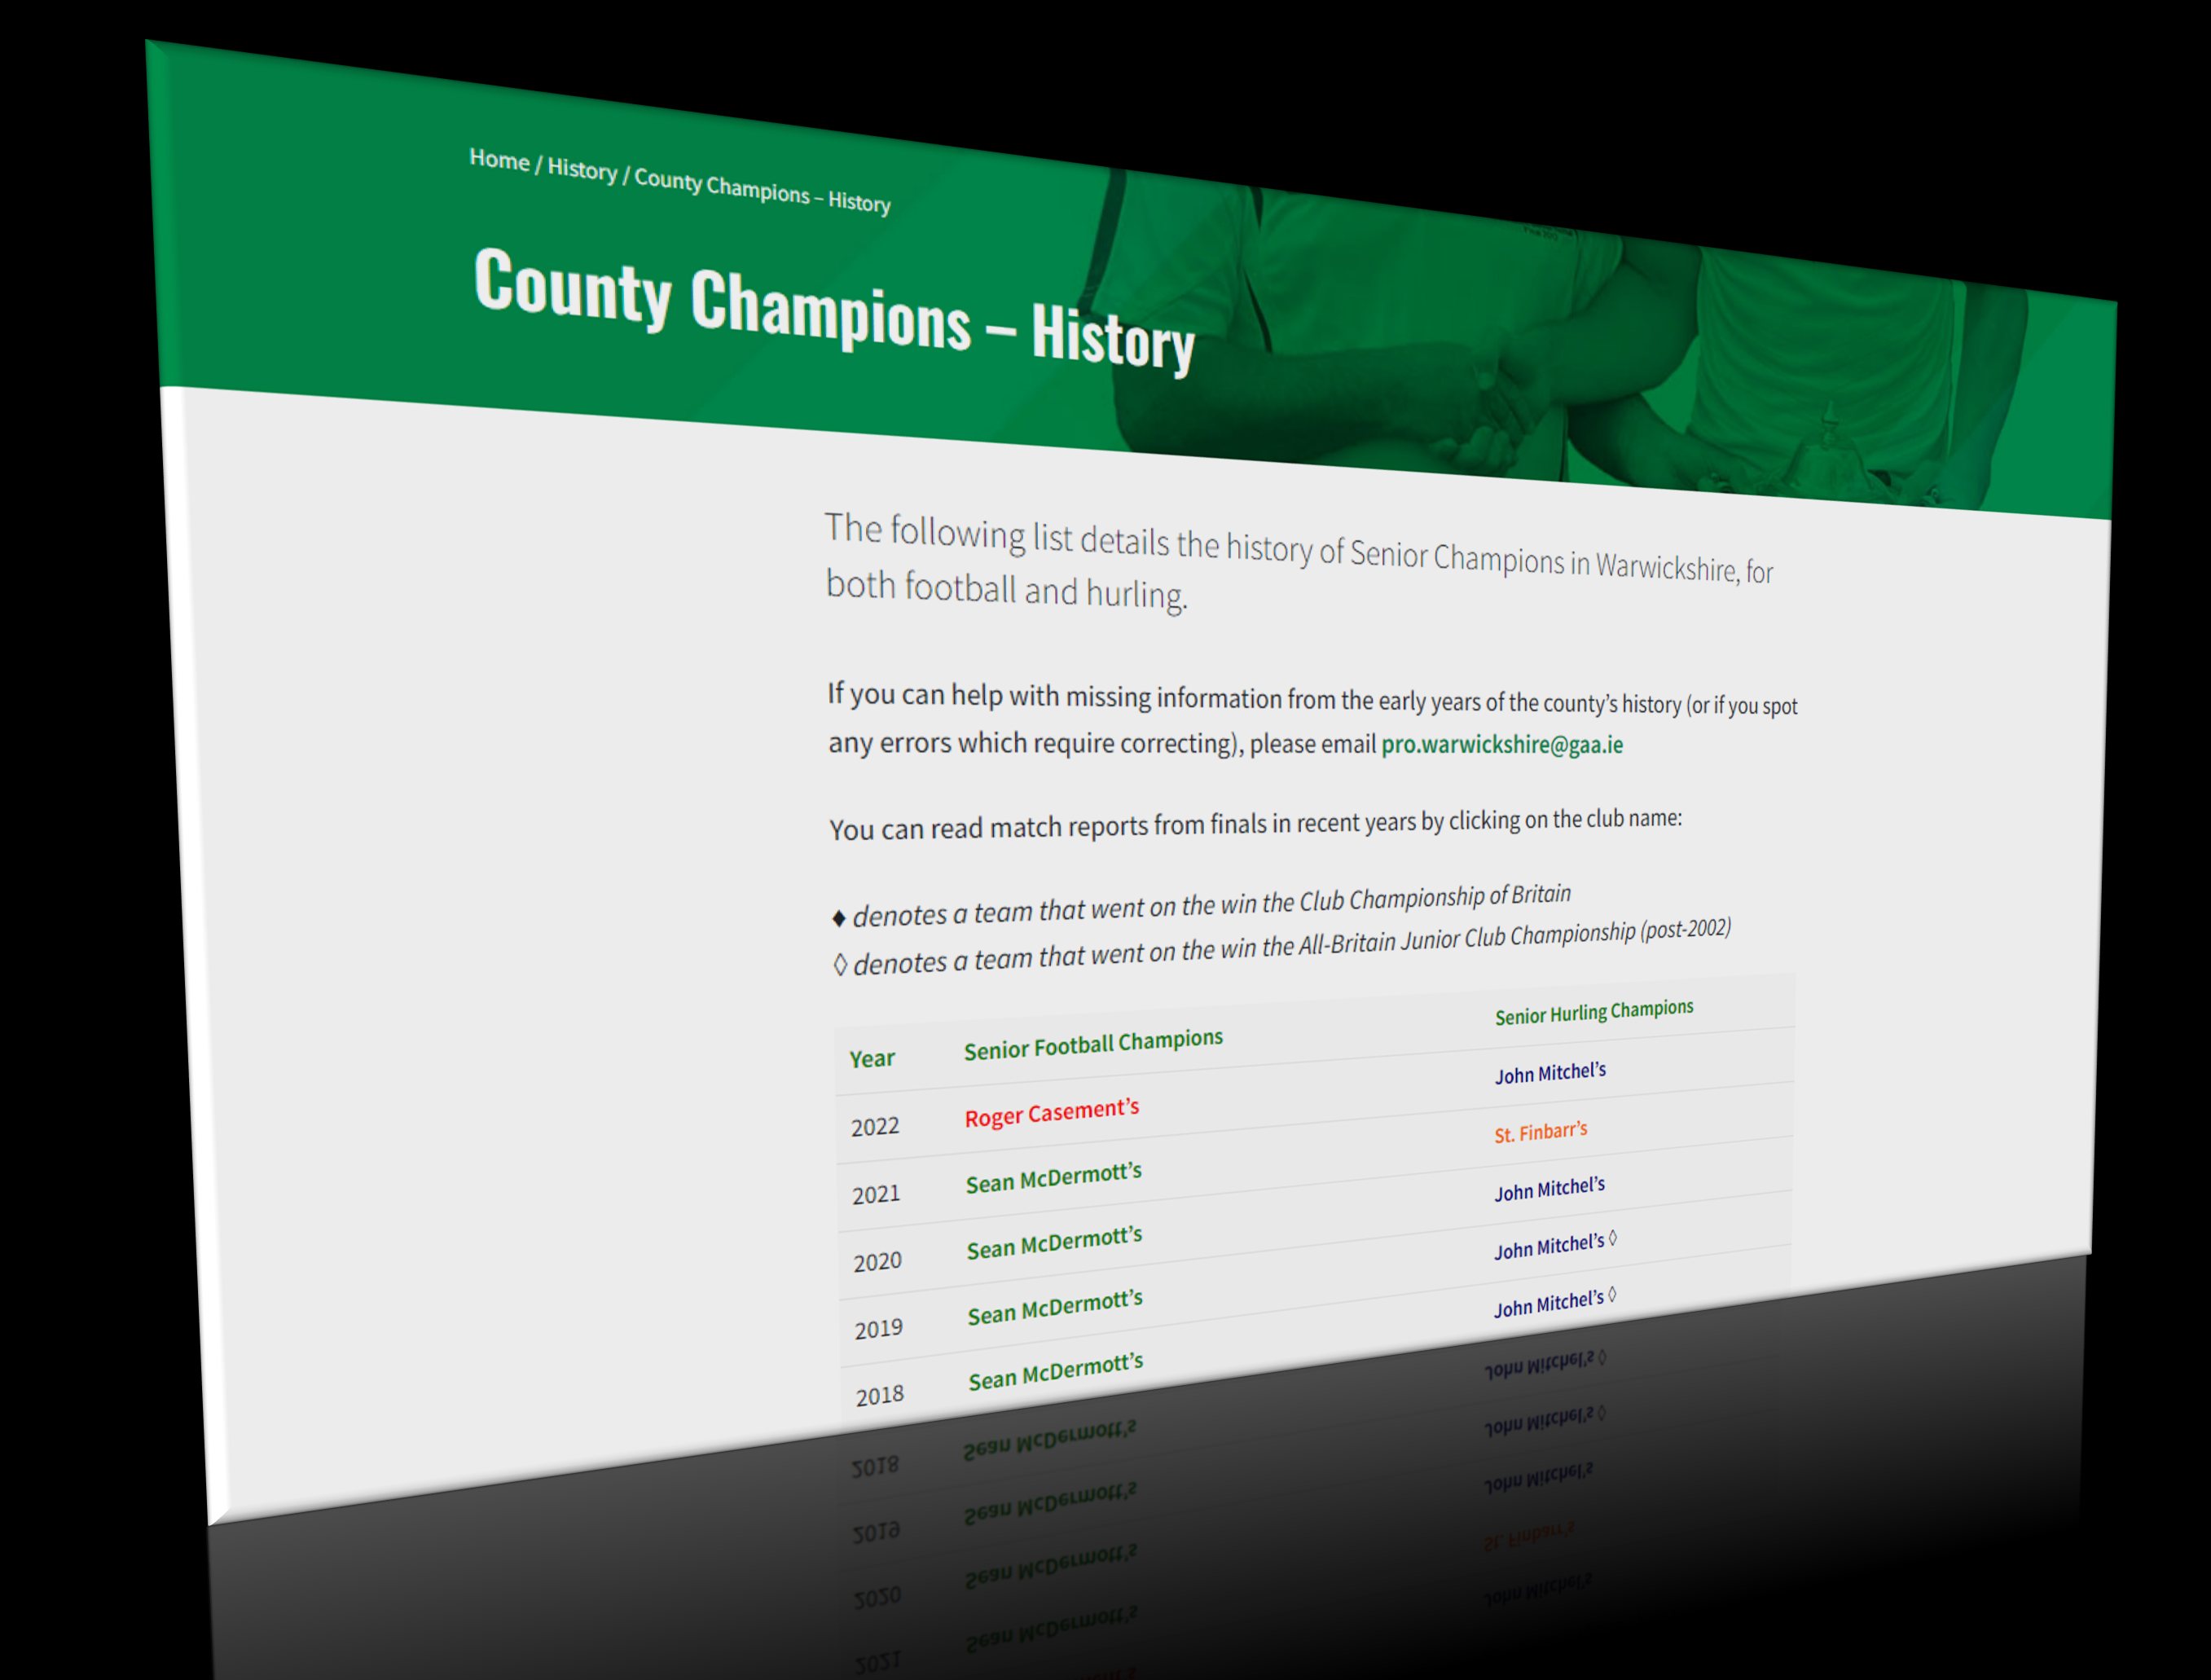 The History of County Champions in Warwickshire